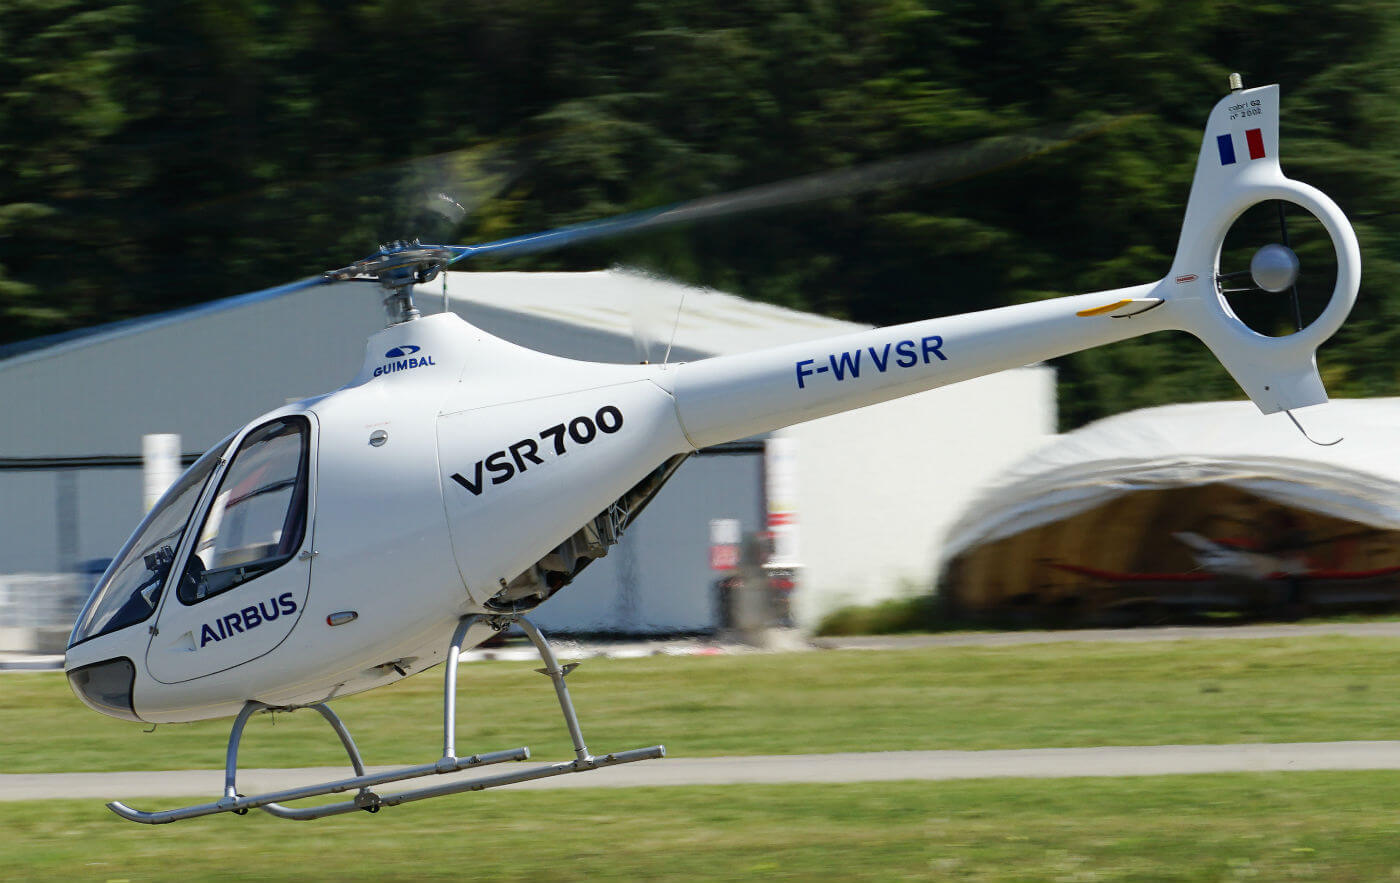 A light military rotary-wing tactical unmanned aerial vehicle, the VSR700 is being developed jointly by Airbus Helicopters and Helicopteres Guimbal, the original manufacturer of the civil-certified Cabri G2 helicopter from which the VSR700 is derived. Airbus Photo